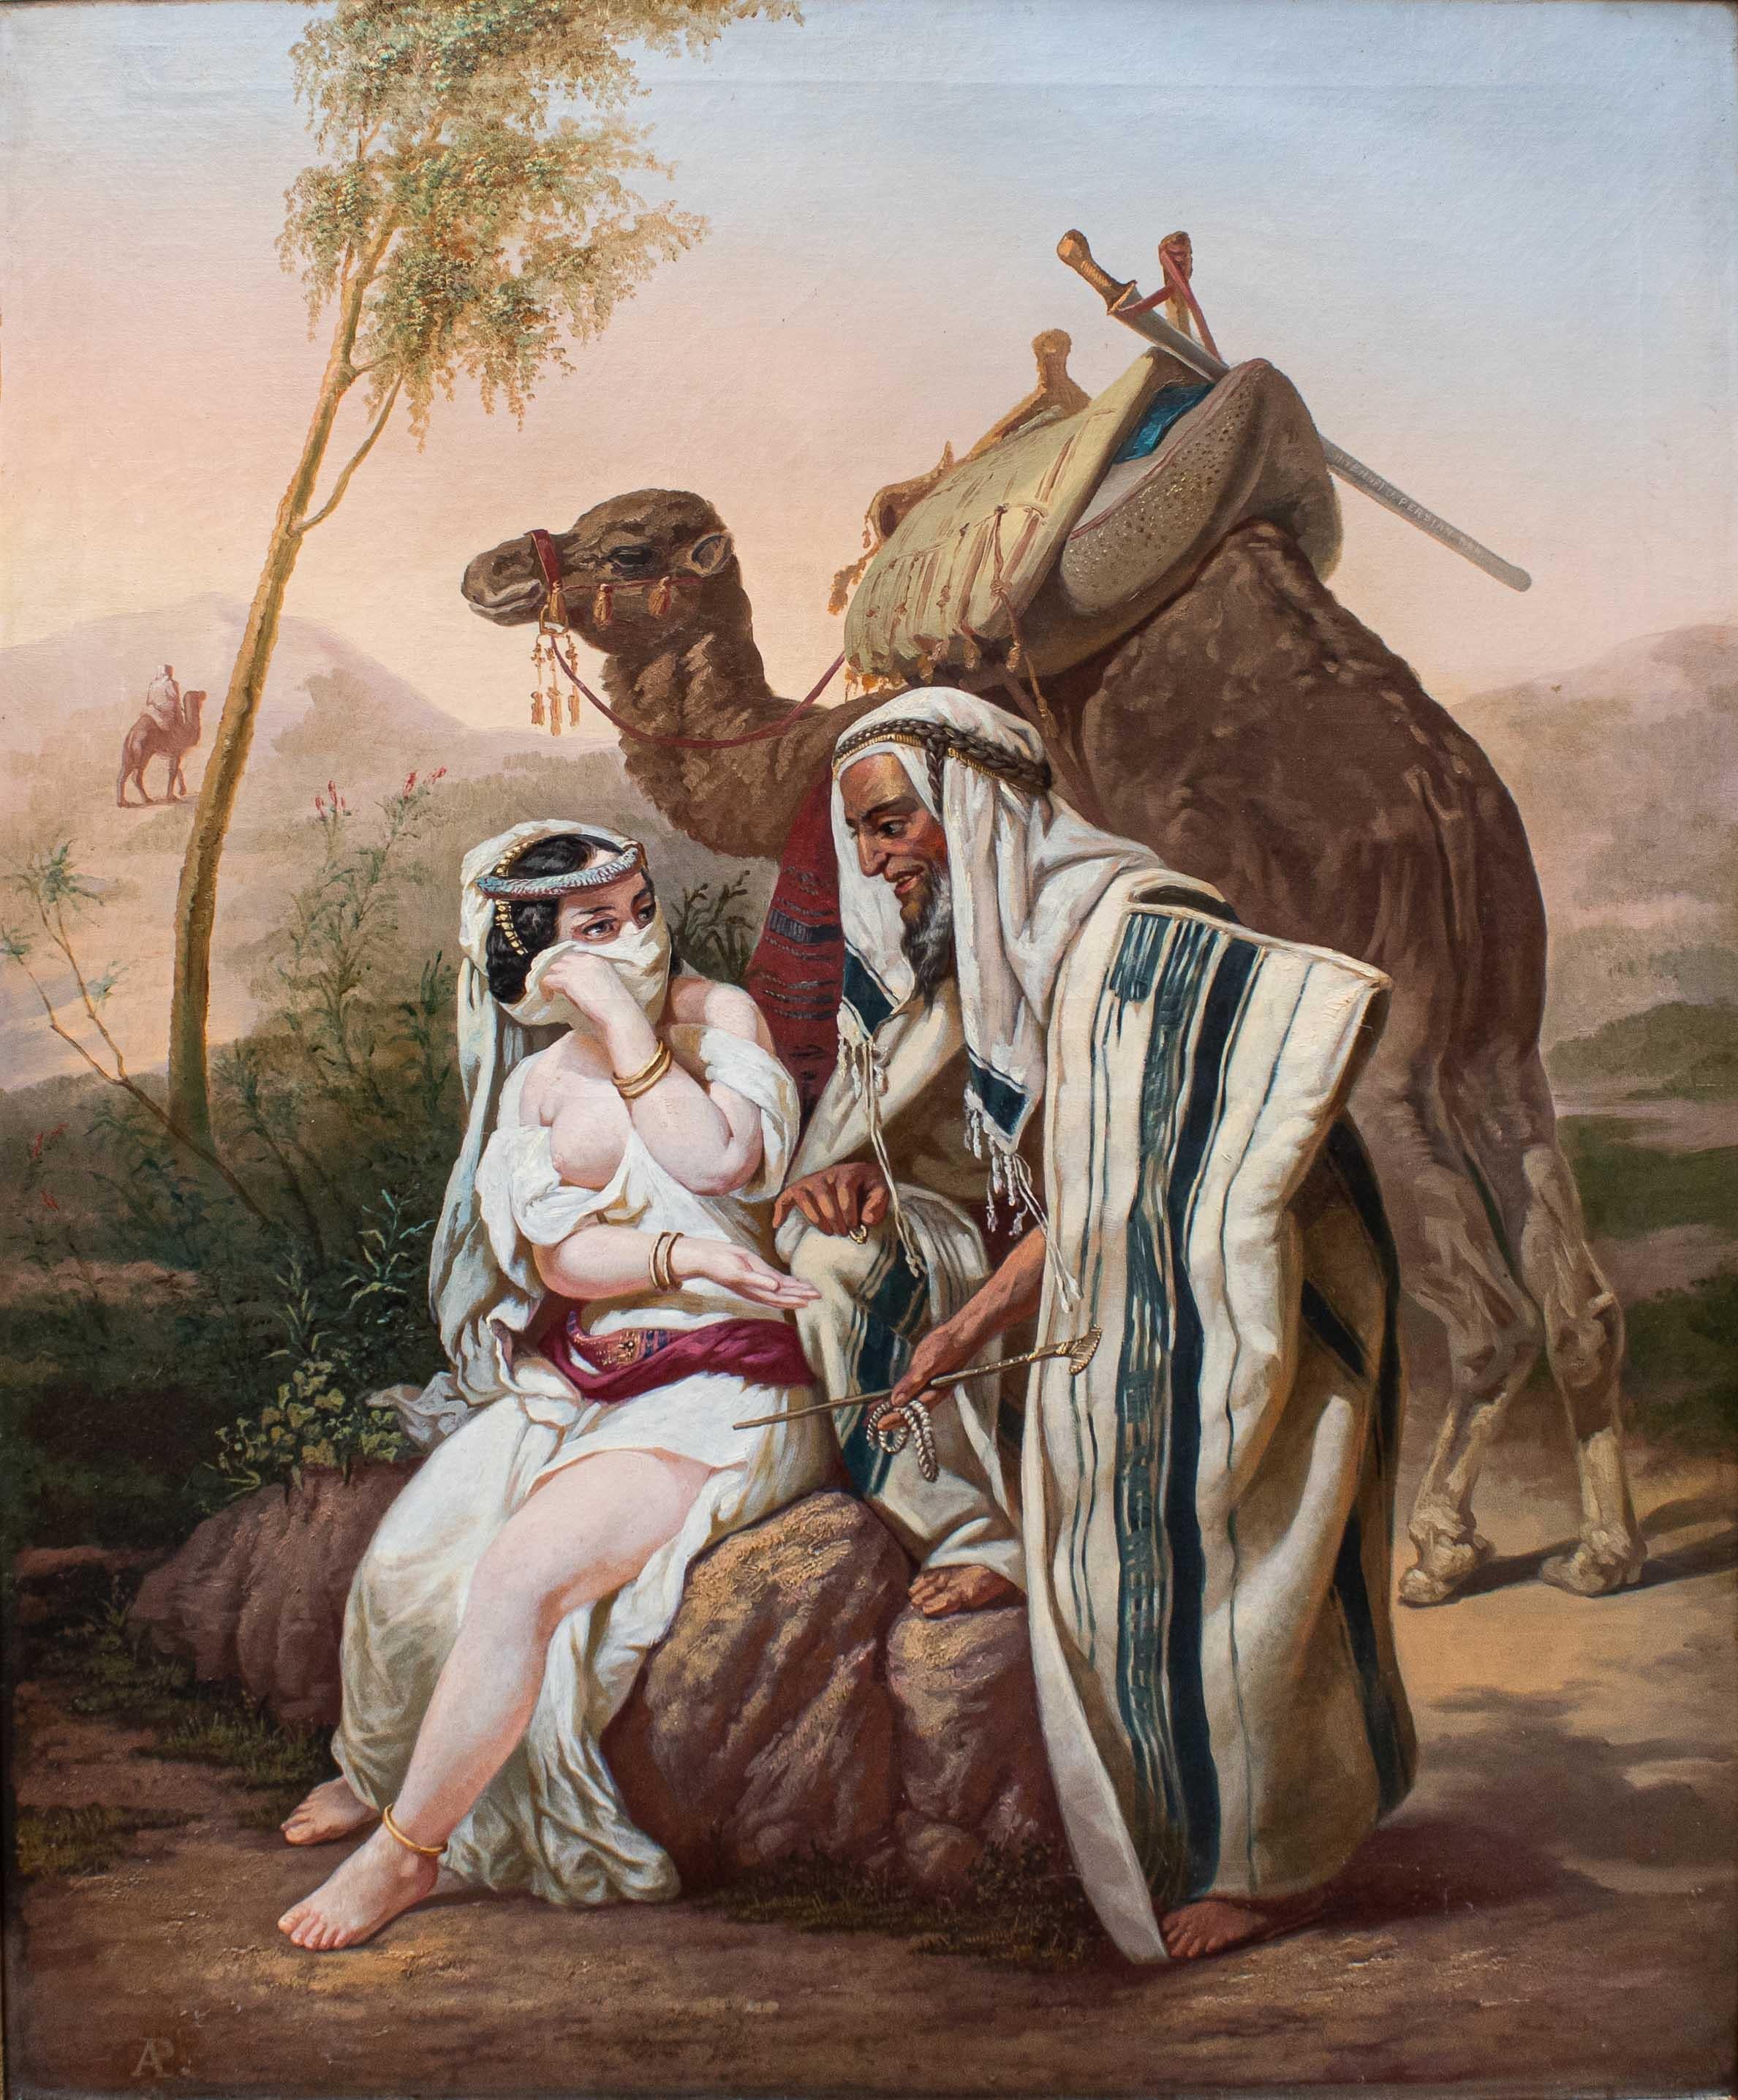 Nineteenth century
Tamar of Judah
Oil on canvas, 114x91 cm
Signed lower left.

The biblical story told in this canvas is that of Tamar of Judah, told in chapter 38 of Genesis. According to the Bible, Judah had three sons: Er, Onan and Sela. Er